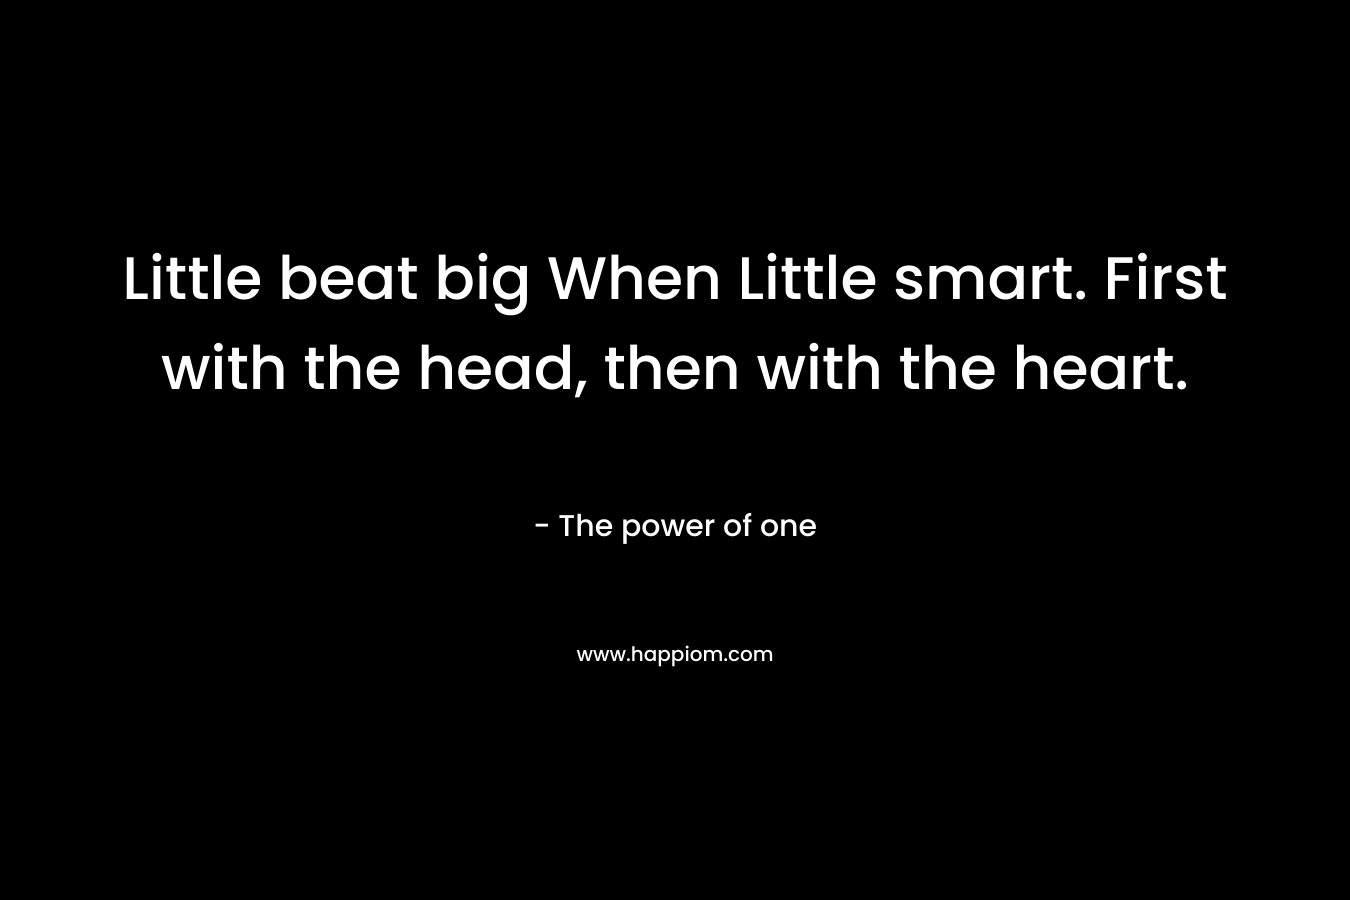 Little beat big When Little smart. First with the head, then with the heart.